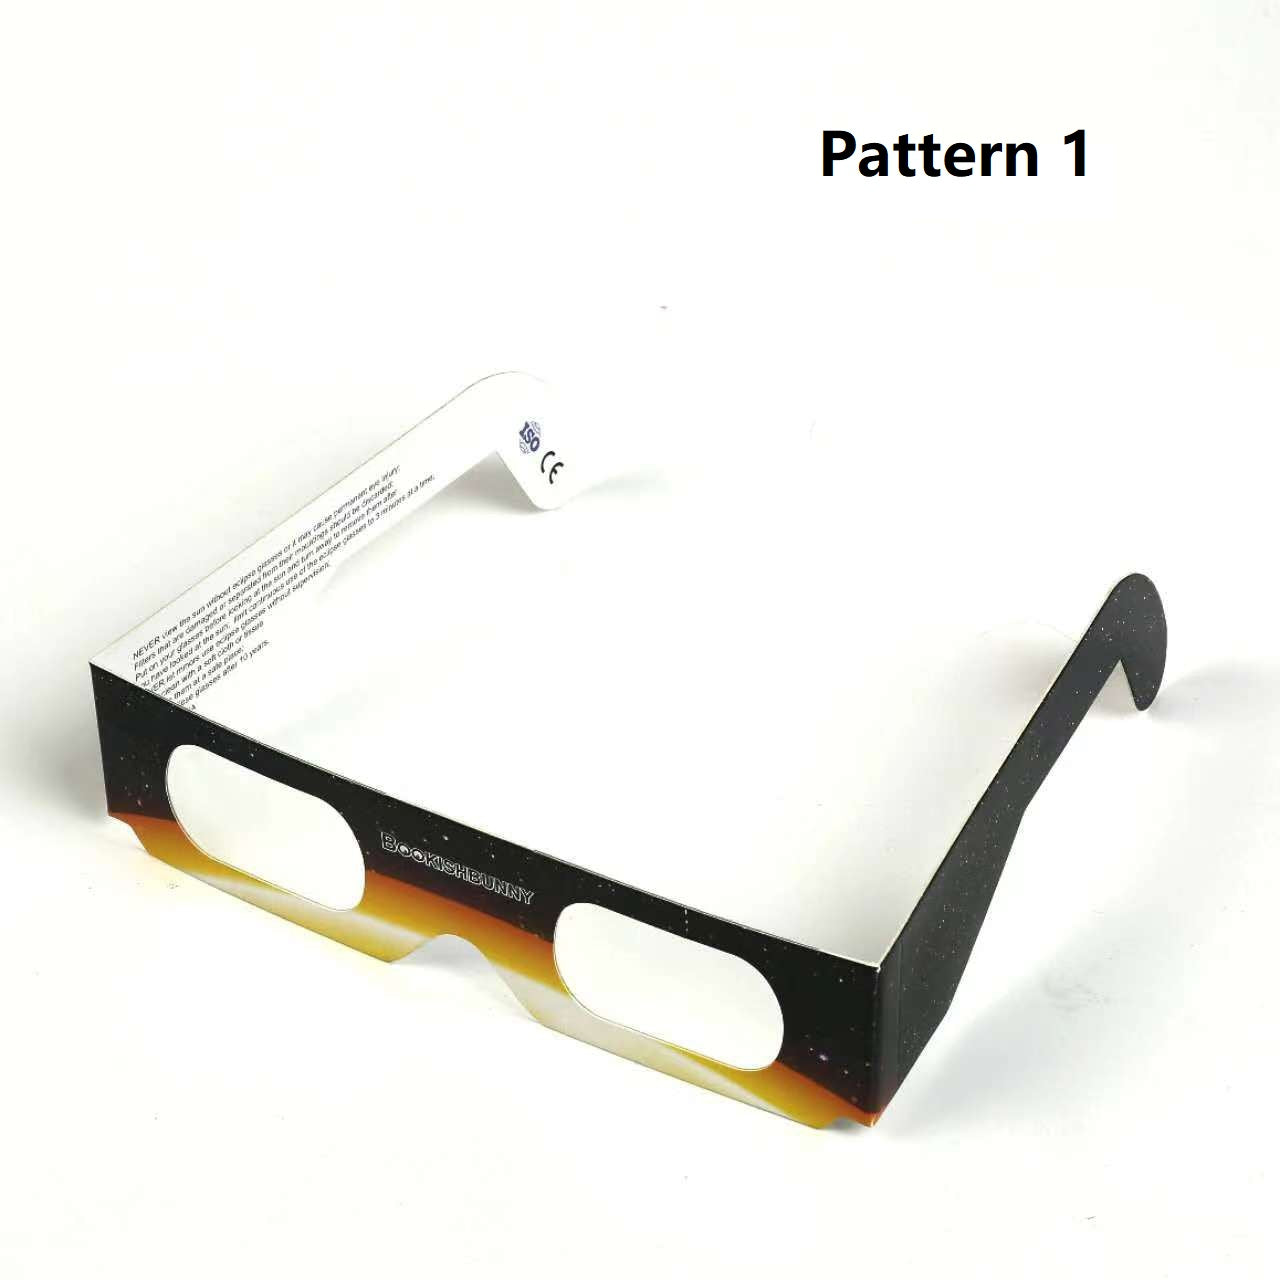 100 Pairs Bookishbunny Solar Eclipse Viewers Paper Glasses Sun Viewing